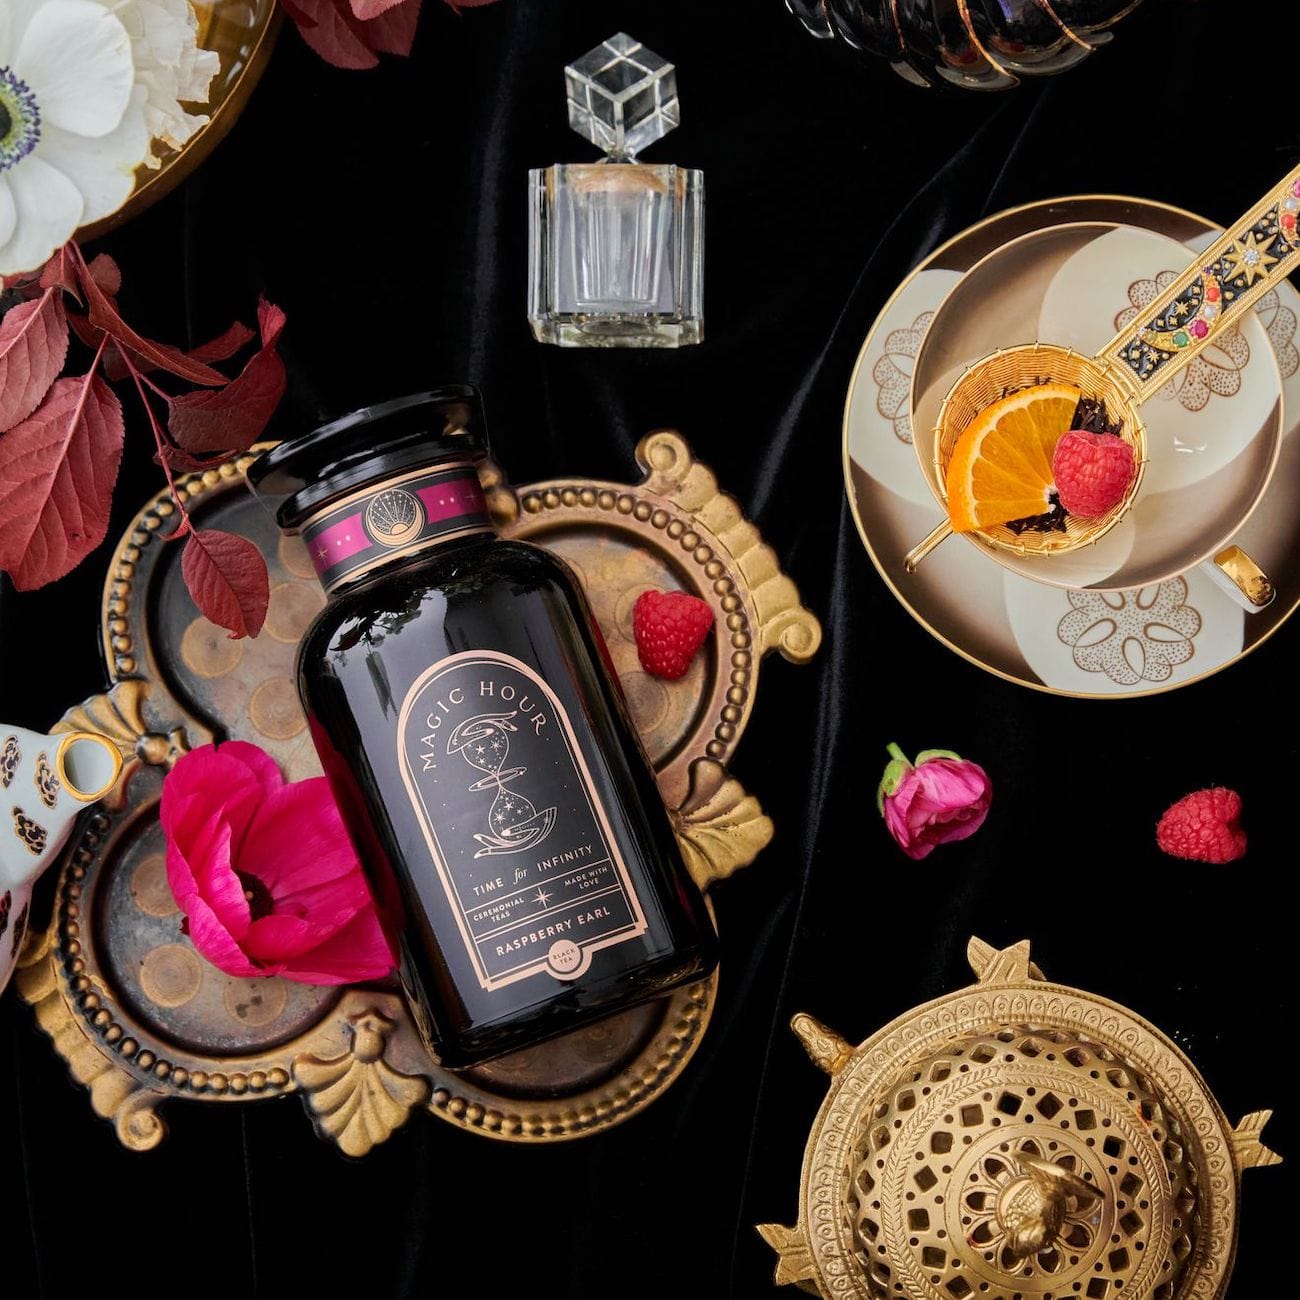 A decorative scene featuring a bottle of Club Magic Hour Raspberry Earl Grey Black Tea on an ornate platter with various decorative items around it, including a teacup with an orange slice, raspberries, a flower, and a golden tea strainer on a black velvet backdrop.